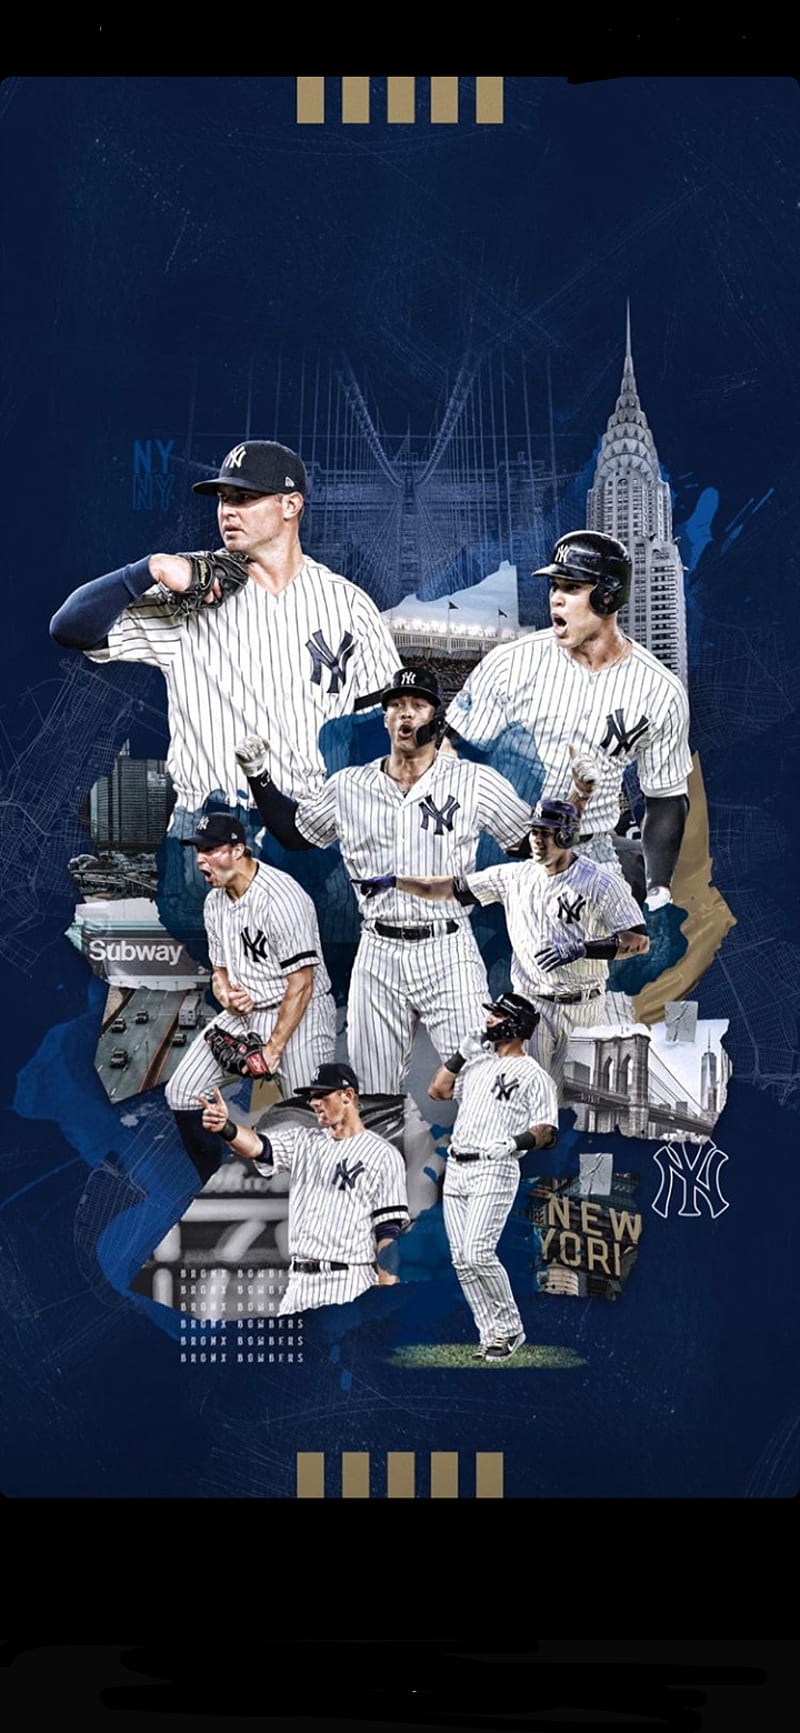 Yankees Opening Day, opening day, HD phone wallpaper